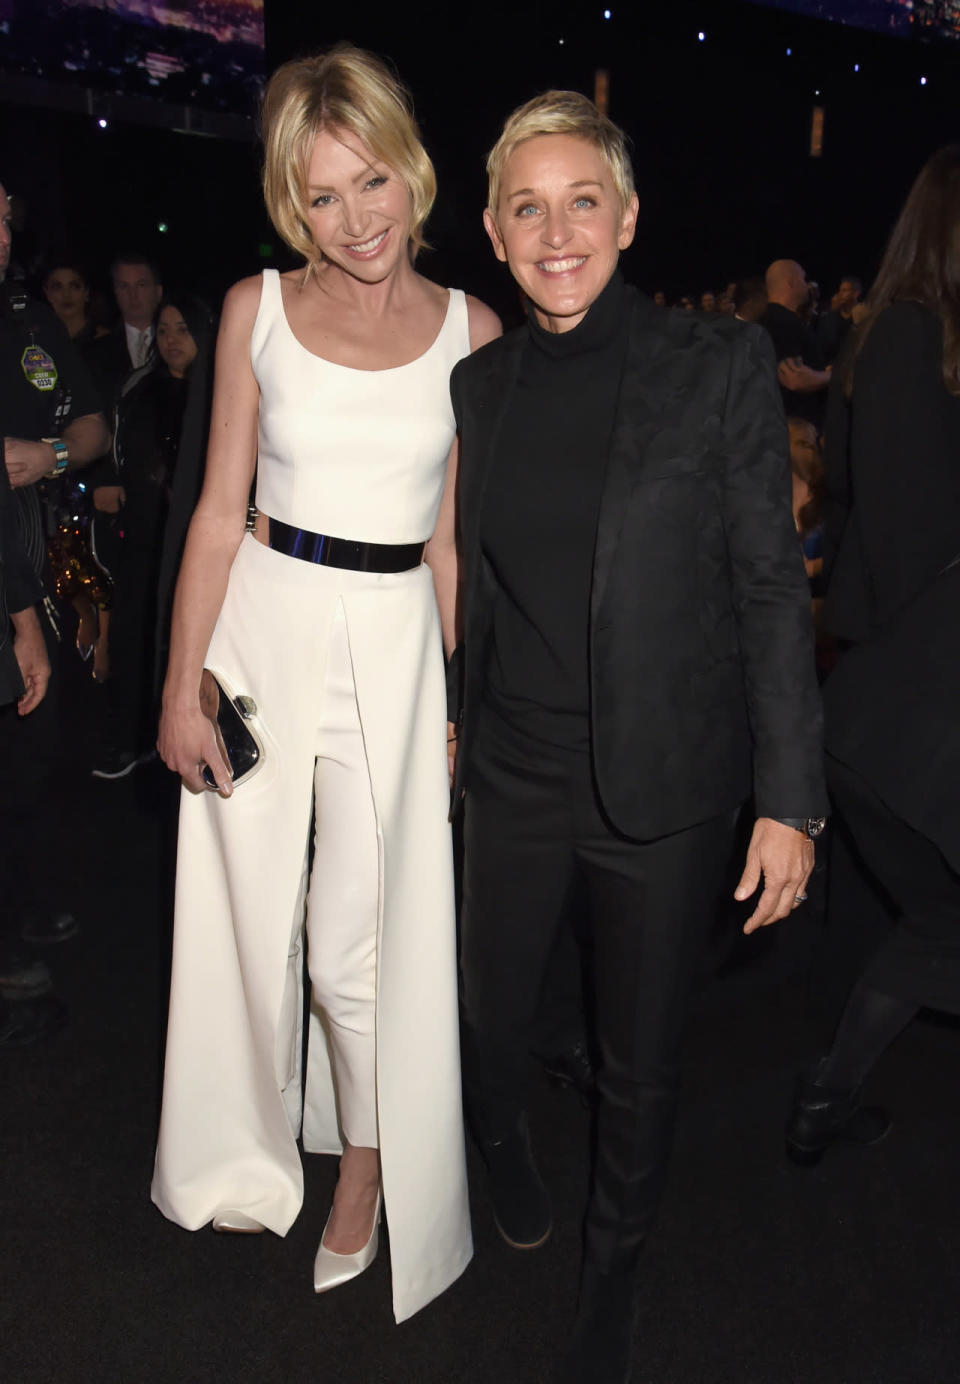 Portia de Rossi and wife Ellen Degeneres coordinated in black and white for the 2016 People’s Choice Awards